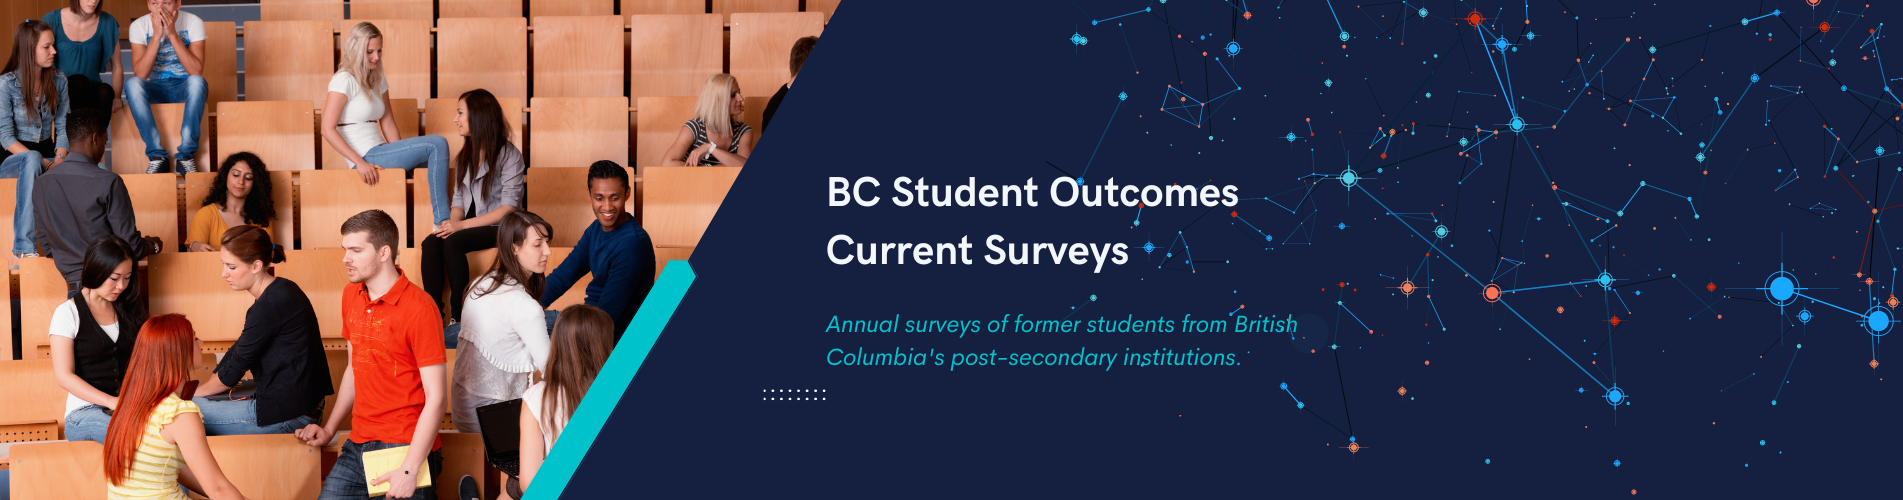 Banner text reads: BC Student Outcomes Current Surveys... Annual surveys of former students from British Columbia's post-secondary institutions.